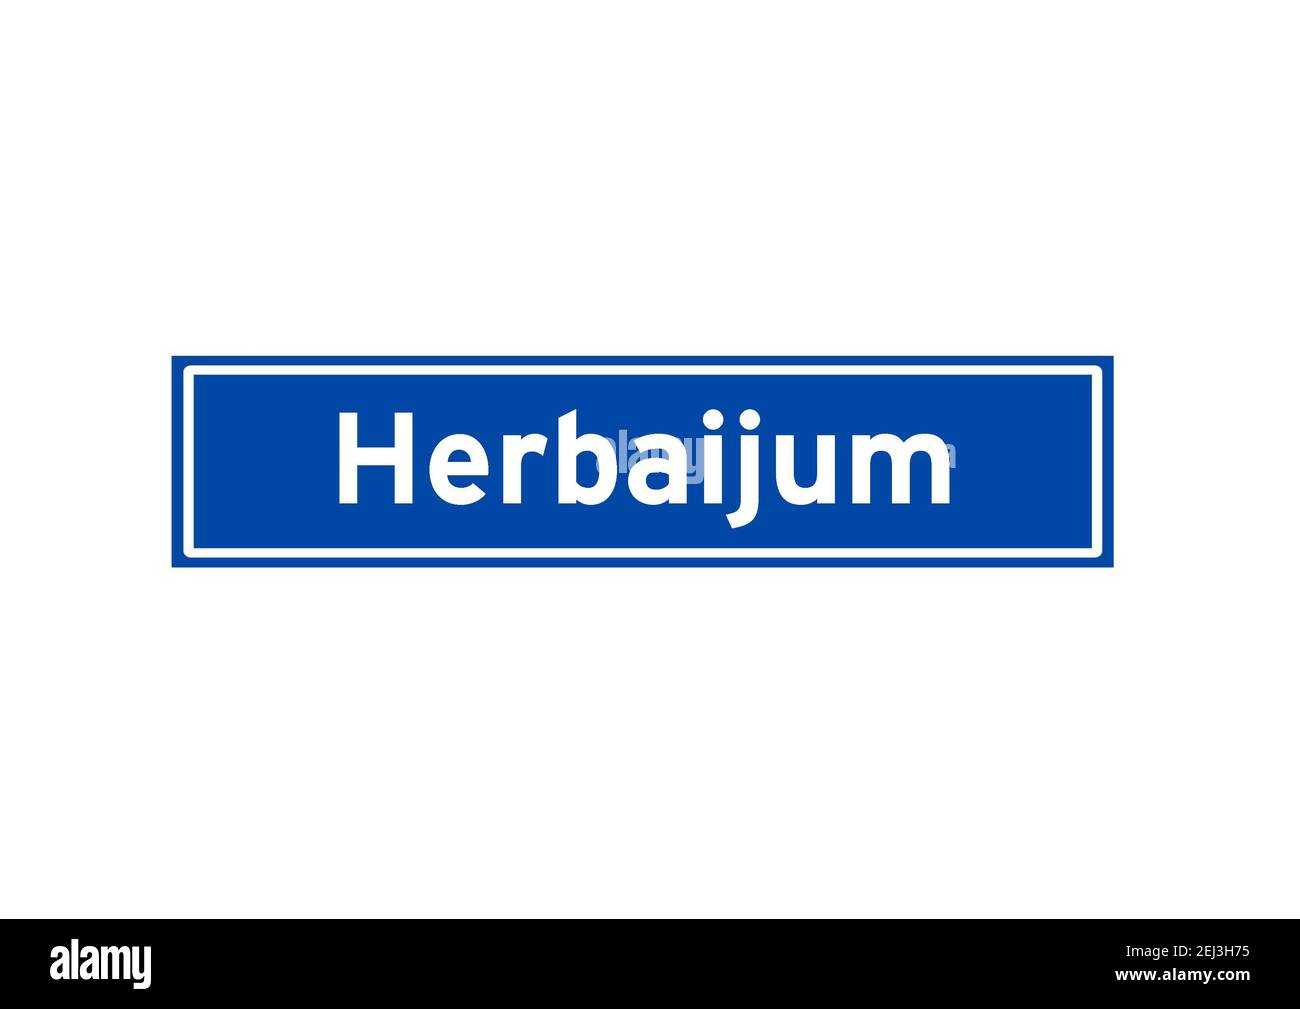 Herbaijum isolated Dutch place name sign. City sign from the Netherlands. Stock Photo